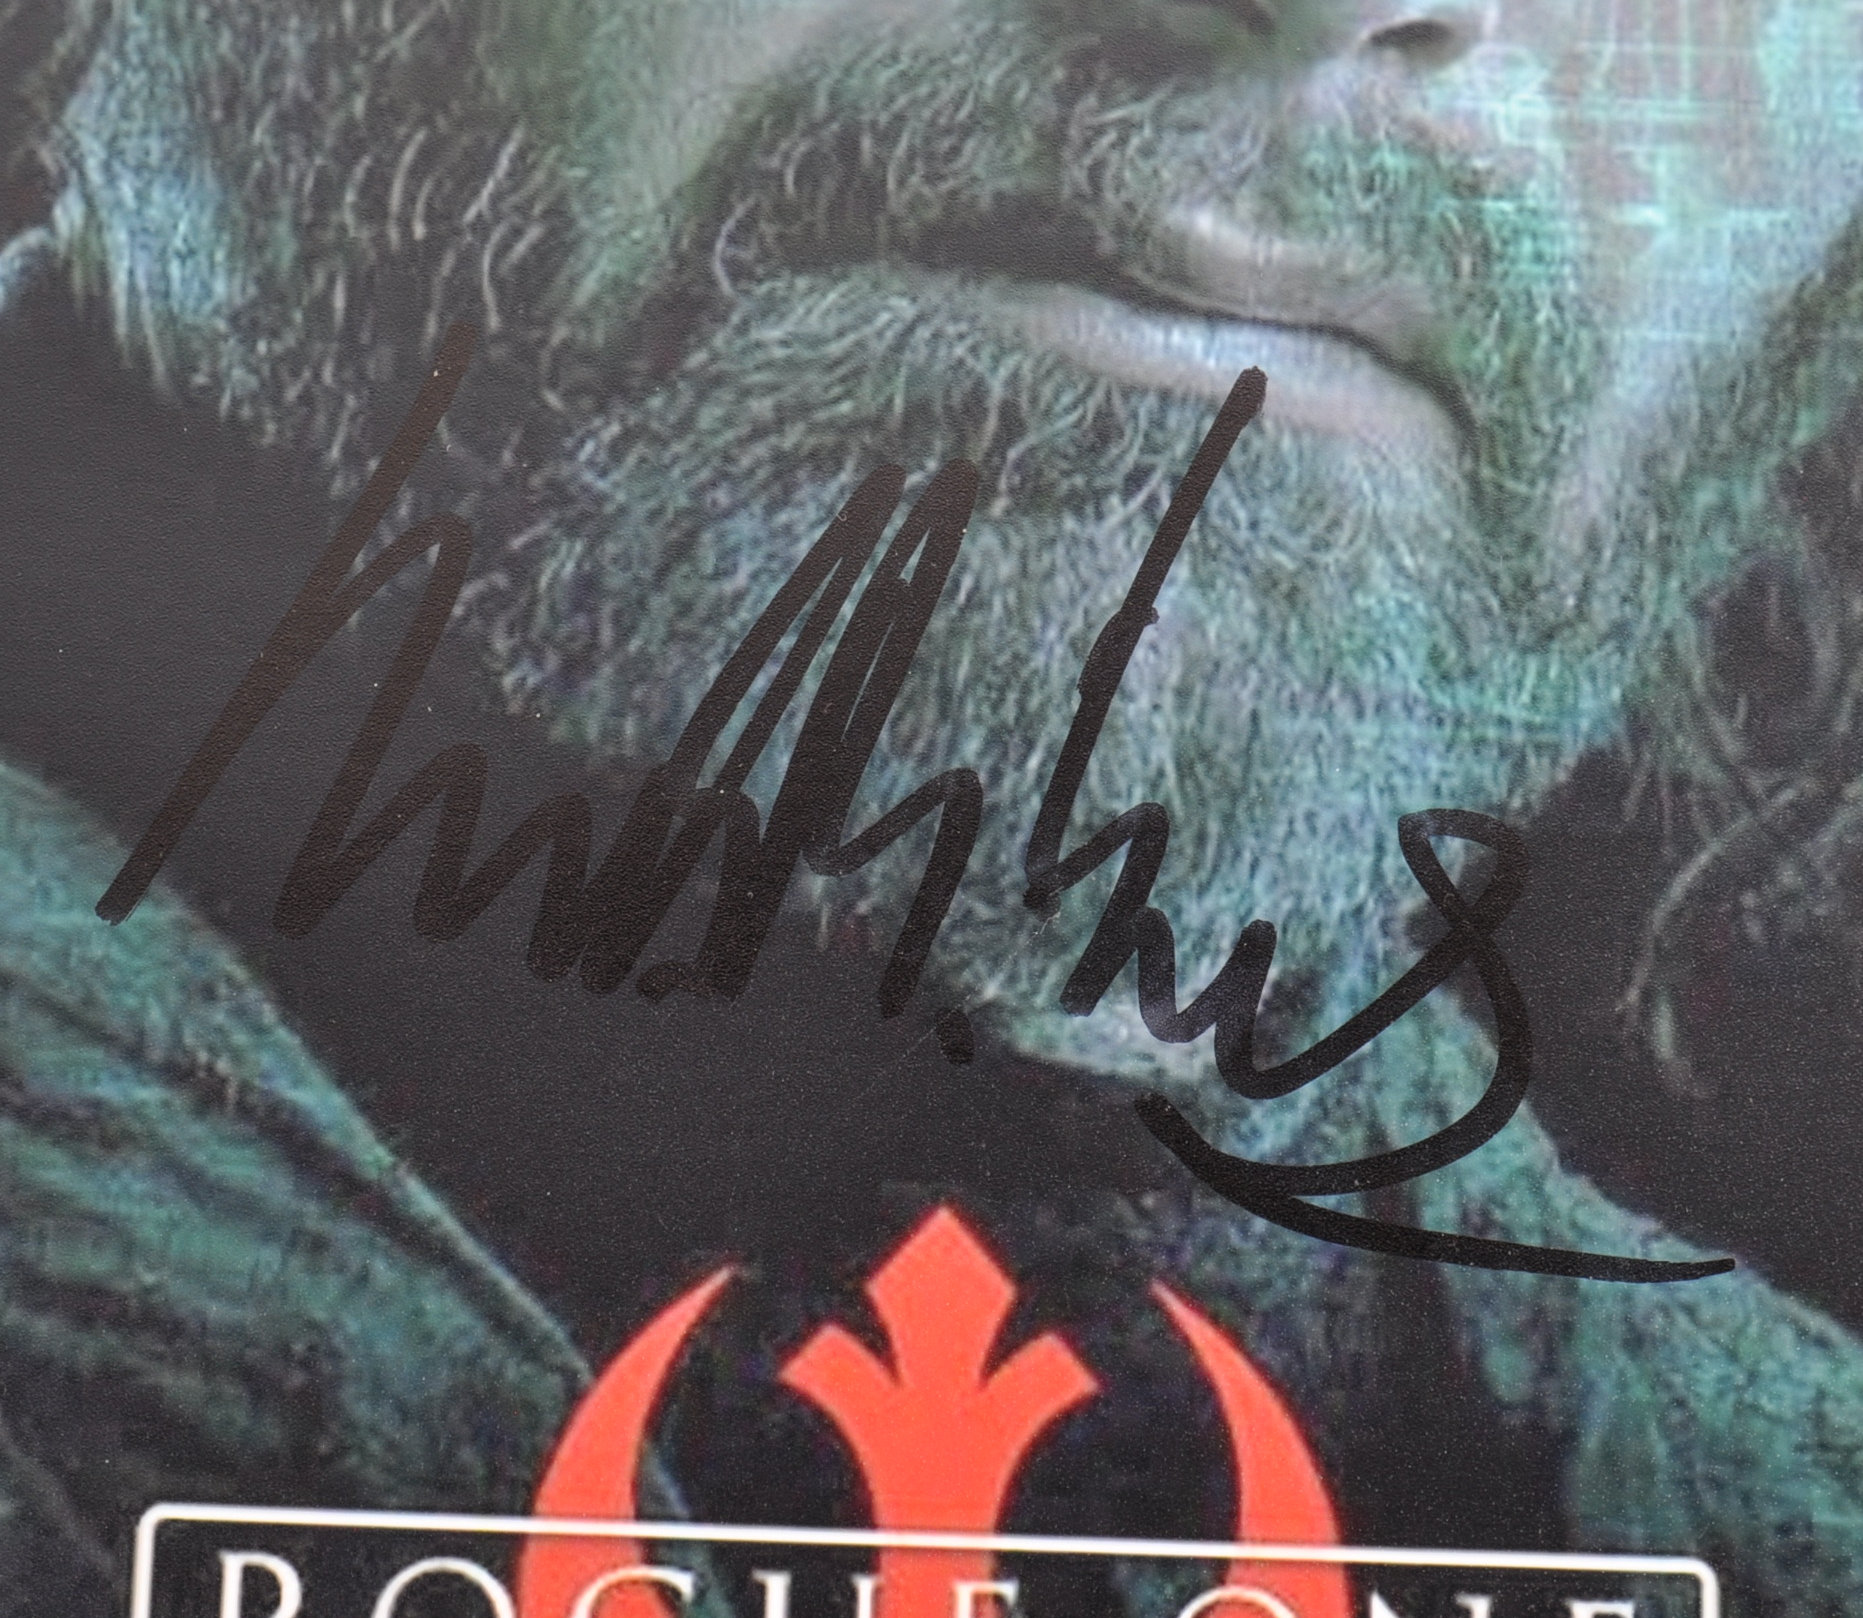 ROGUE ONE - STAR WARS - MADS MIKKELSEN AUTOGRAPHED PHOTO - Image 2 of 2